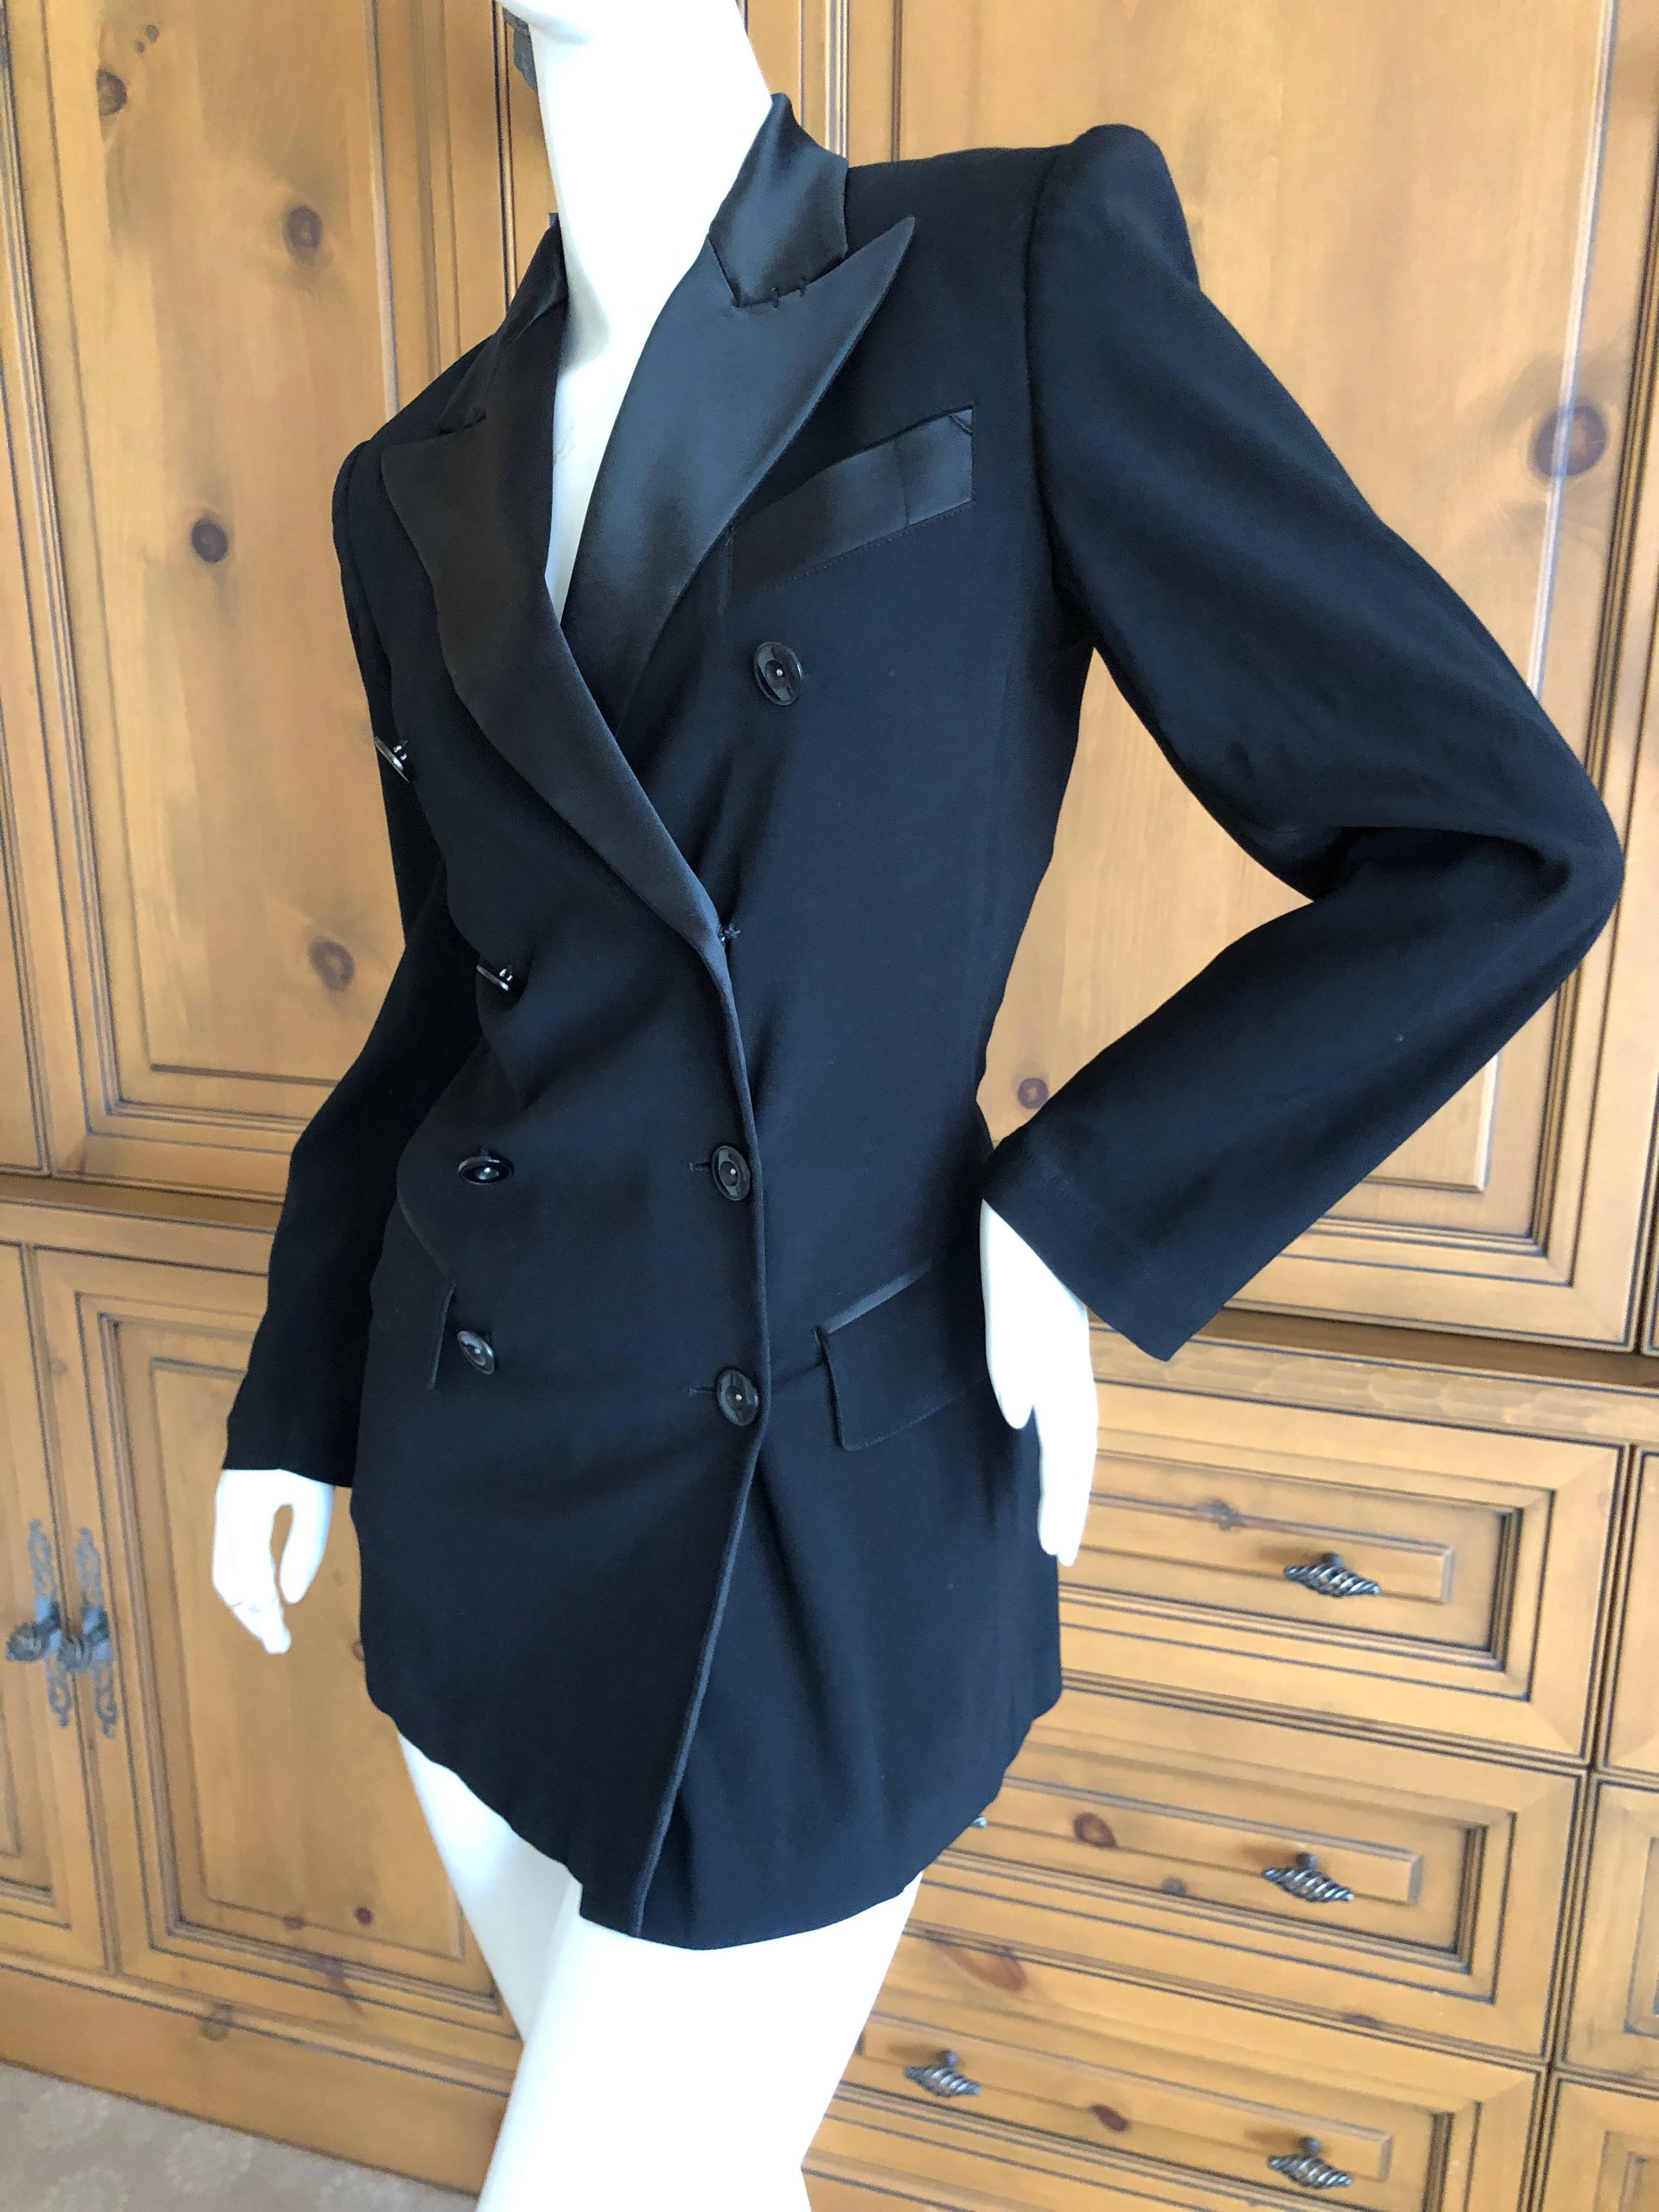 Jean Paul Gaultier Femme Vintage Satin Trimmed Double Breasted Tuxedo Jacket In Excellent Condition For Sale In Cloverdale, CA